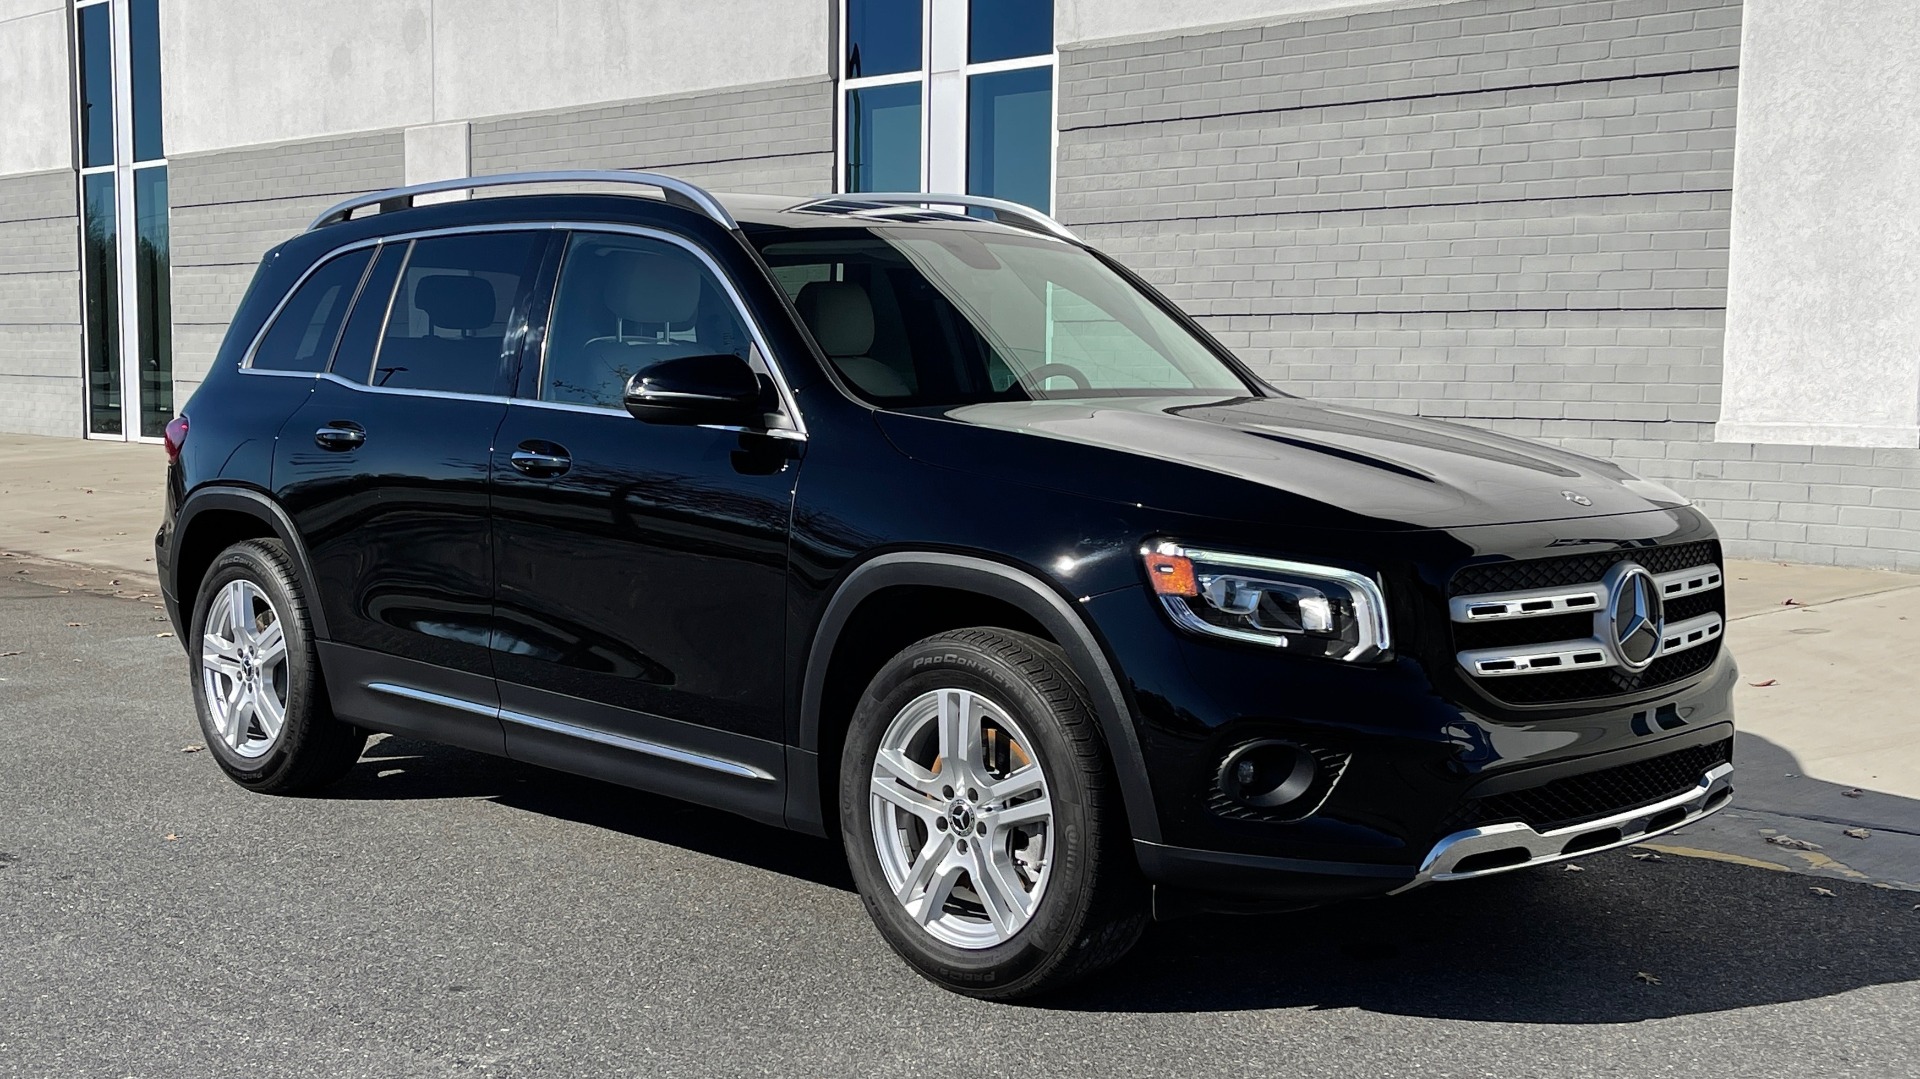 Used 2020 Mercedes-Benz GLB 250 PREMIUM 2.0L / 8-SPD AUTO / BLIND SPOT / 10.25-IN DISPLAY / REARVIEW for sale $45,385 at Formula Imports in Charlotte NC 28227 5